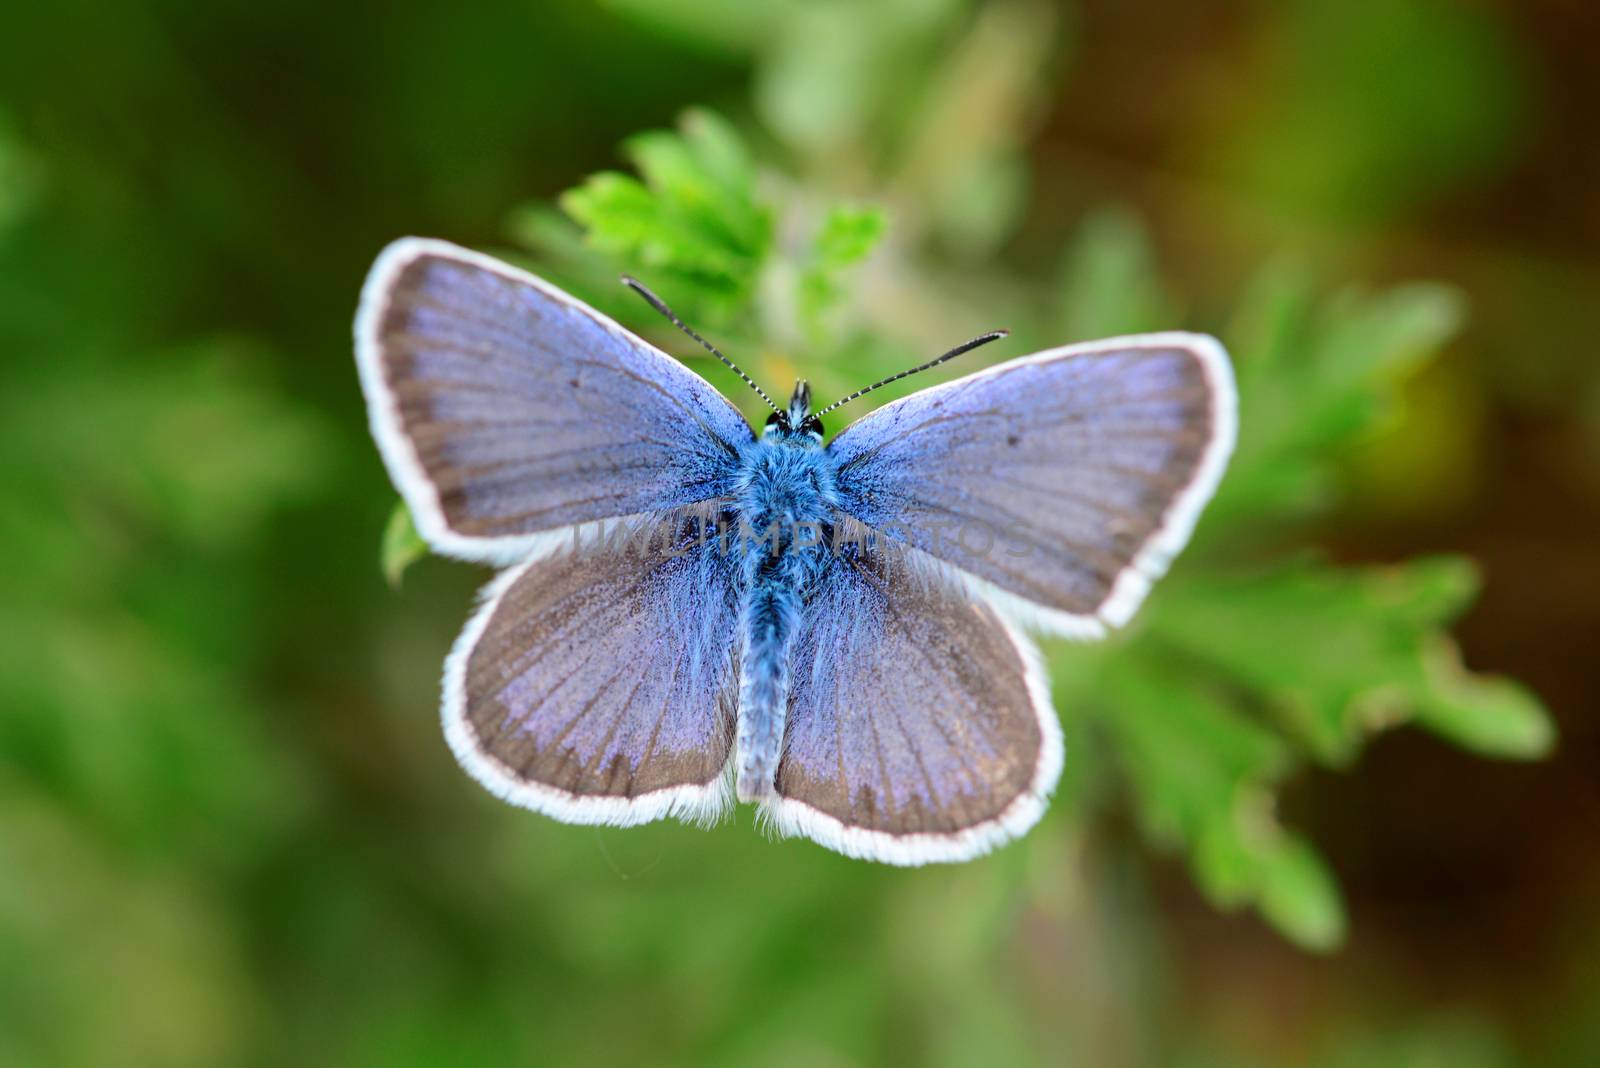 blue butterfly close detail by tony4urban